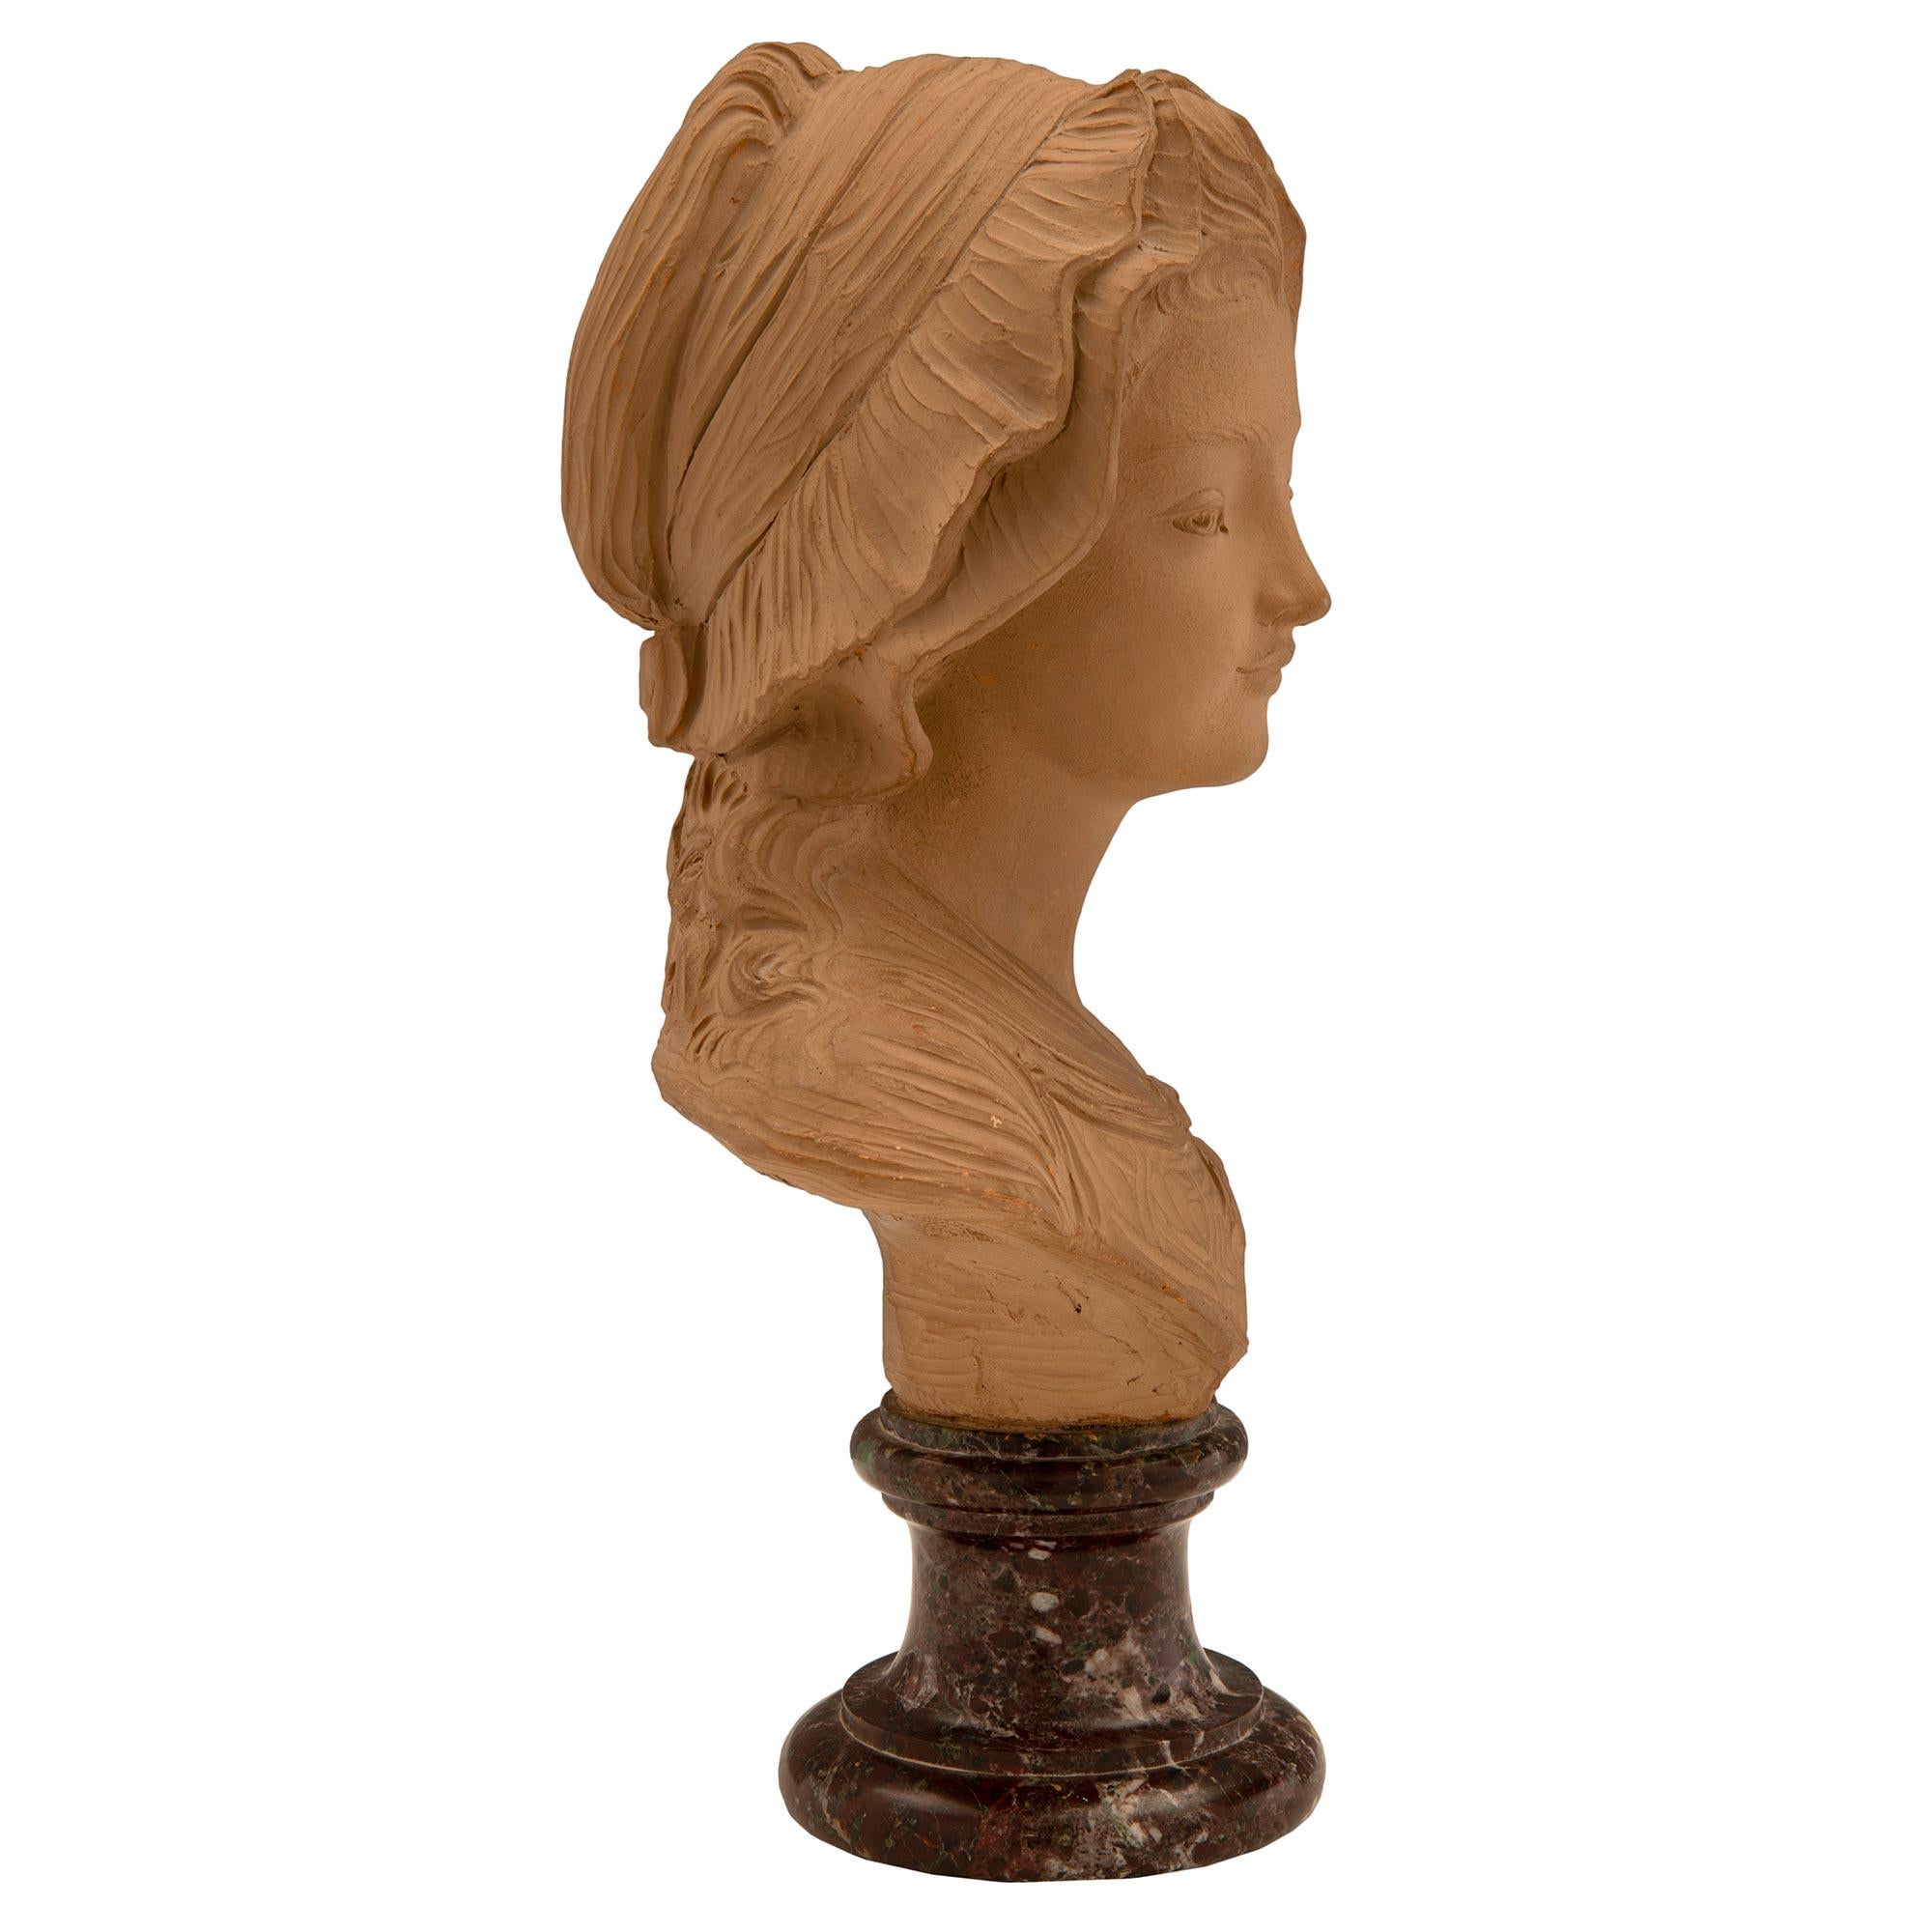 A charming and finely detailed French 19th century Terra Cotta and Rosso Levanto marble bust. The bust is raised by an elegant circular mottled Rosso Levanto socle pedestal with a fine mottled border. Above is the wonderfully executed terra cotta